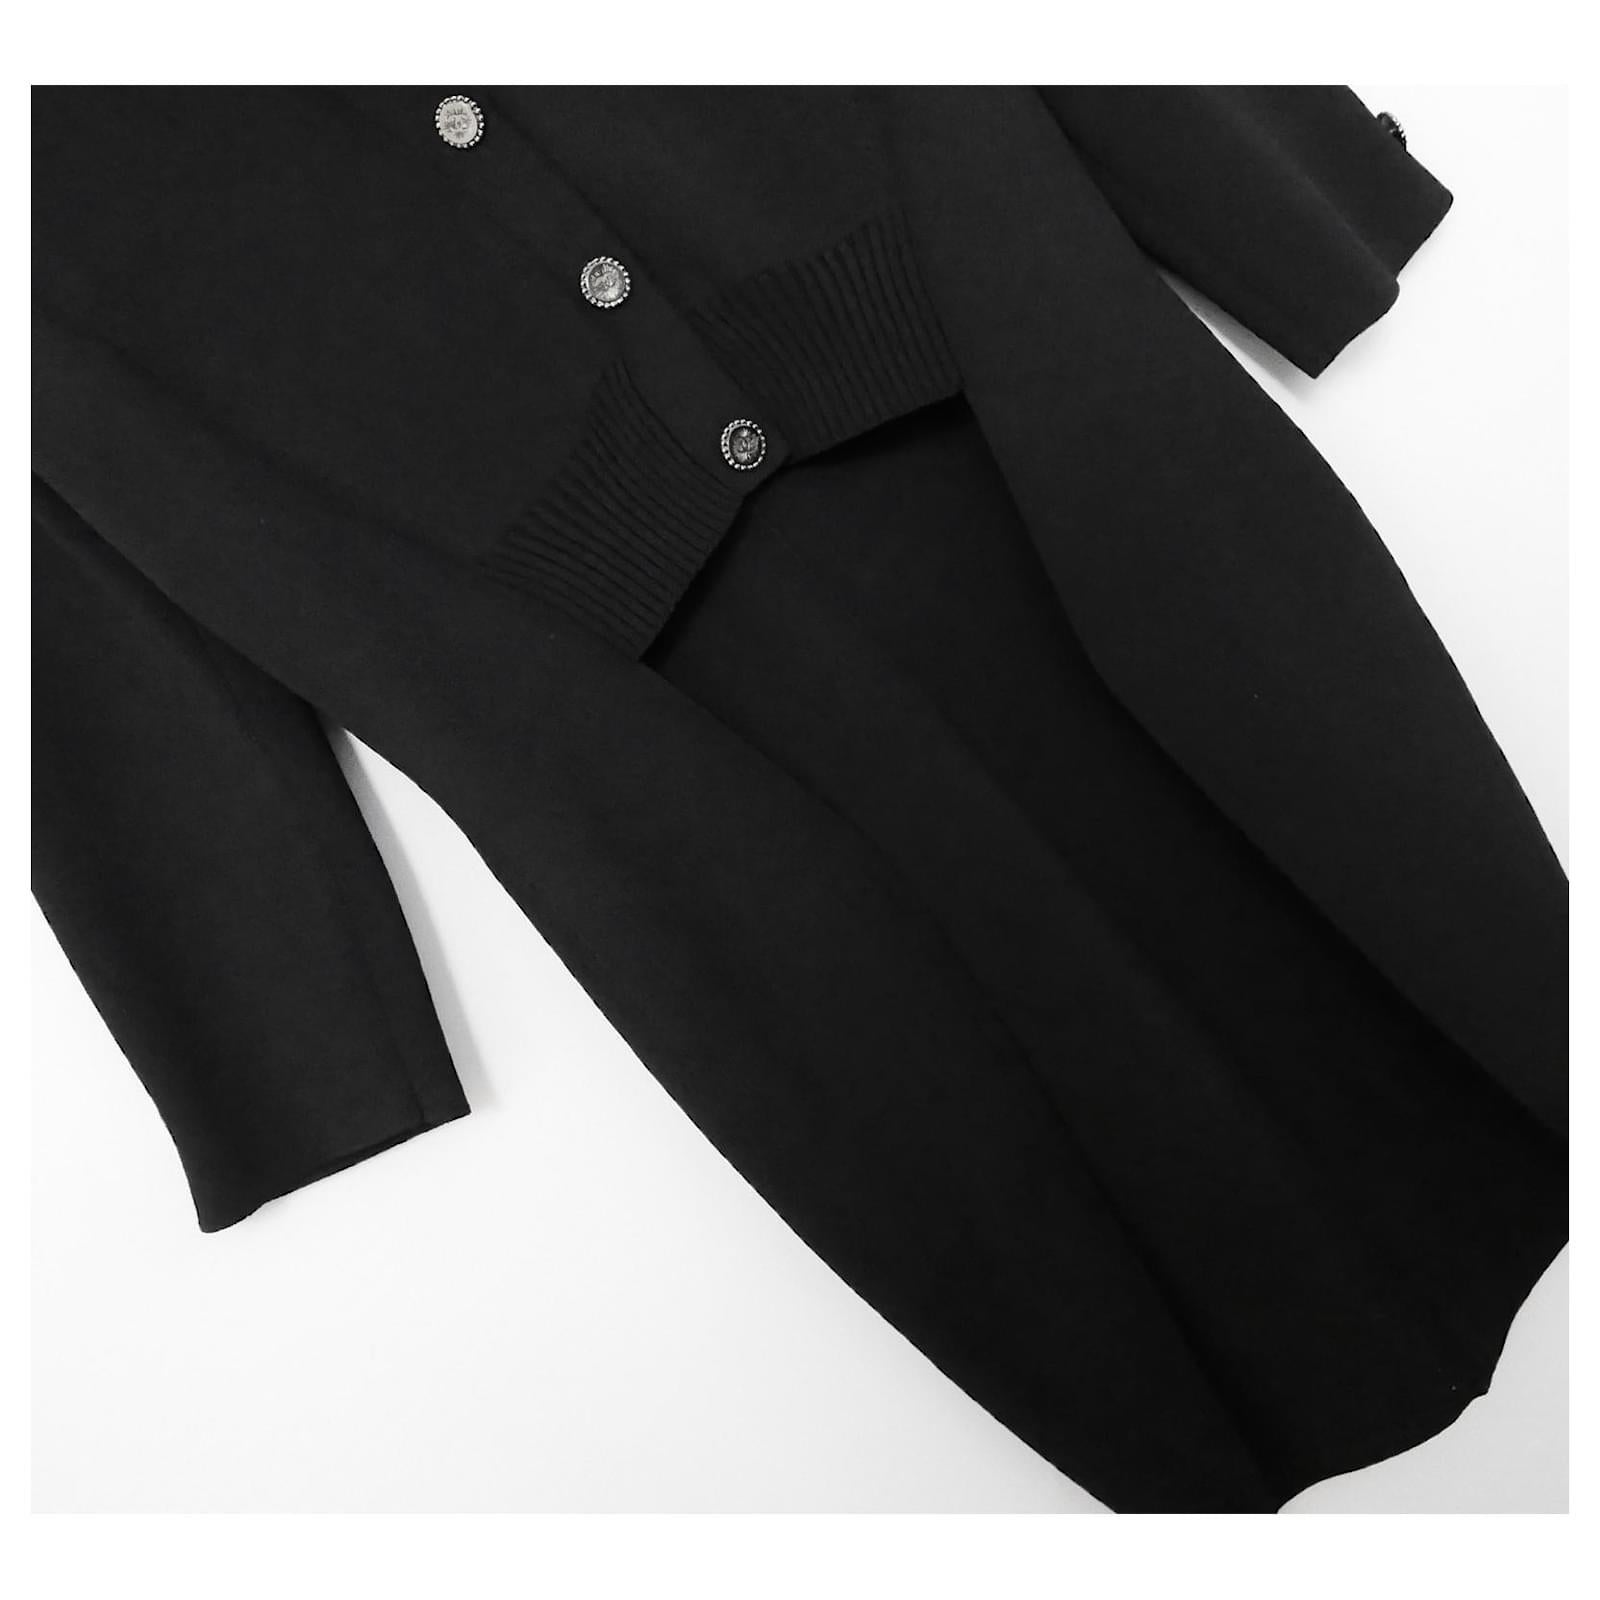 Relaxed chic knitted tailcoat jacket from the Chanel Resort 2011 Paris-St Tropez collection. unworn. Made from a smooth black viscose/polyester mix knit with small collar, three quarter sleeves and cut-away front. Has decorative metal CC buttons to